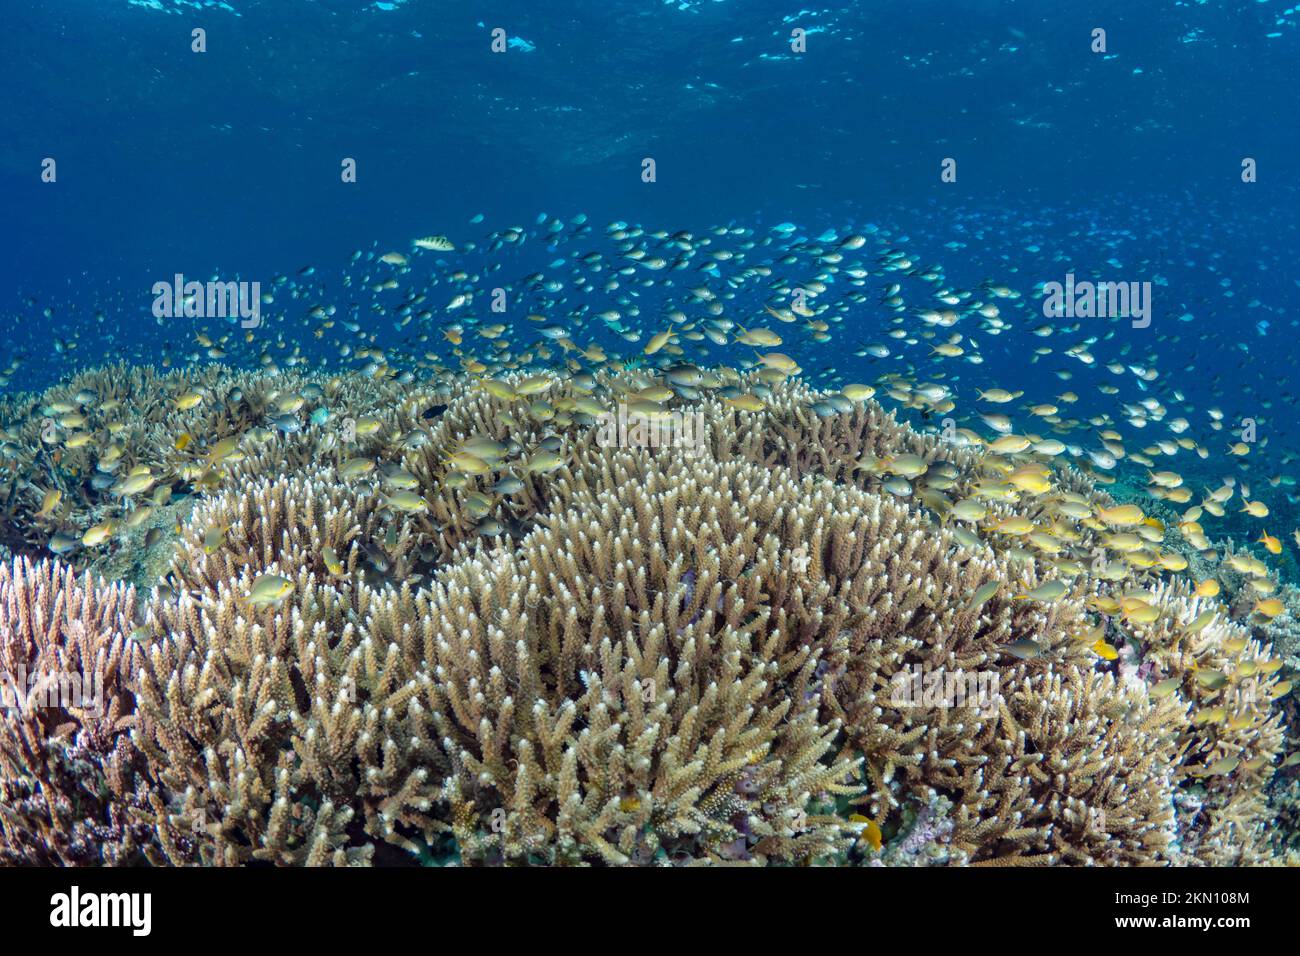 Ultimate biodiversity of the Indo pacific with schooling tropical fish above healthy abundant coral reef ecosystem. Stock Photo